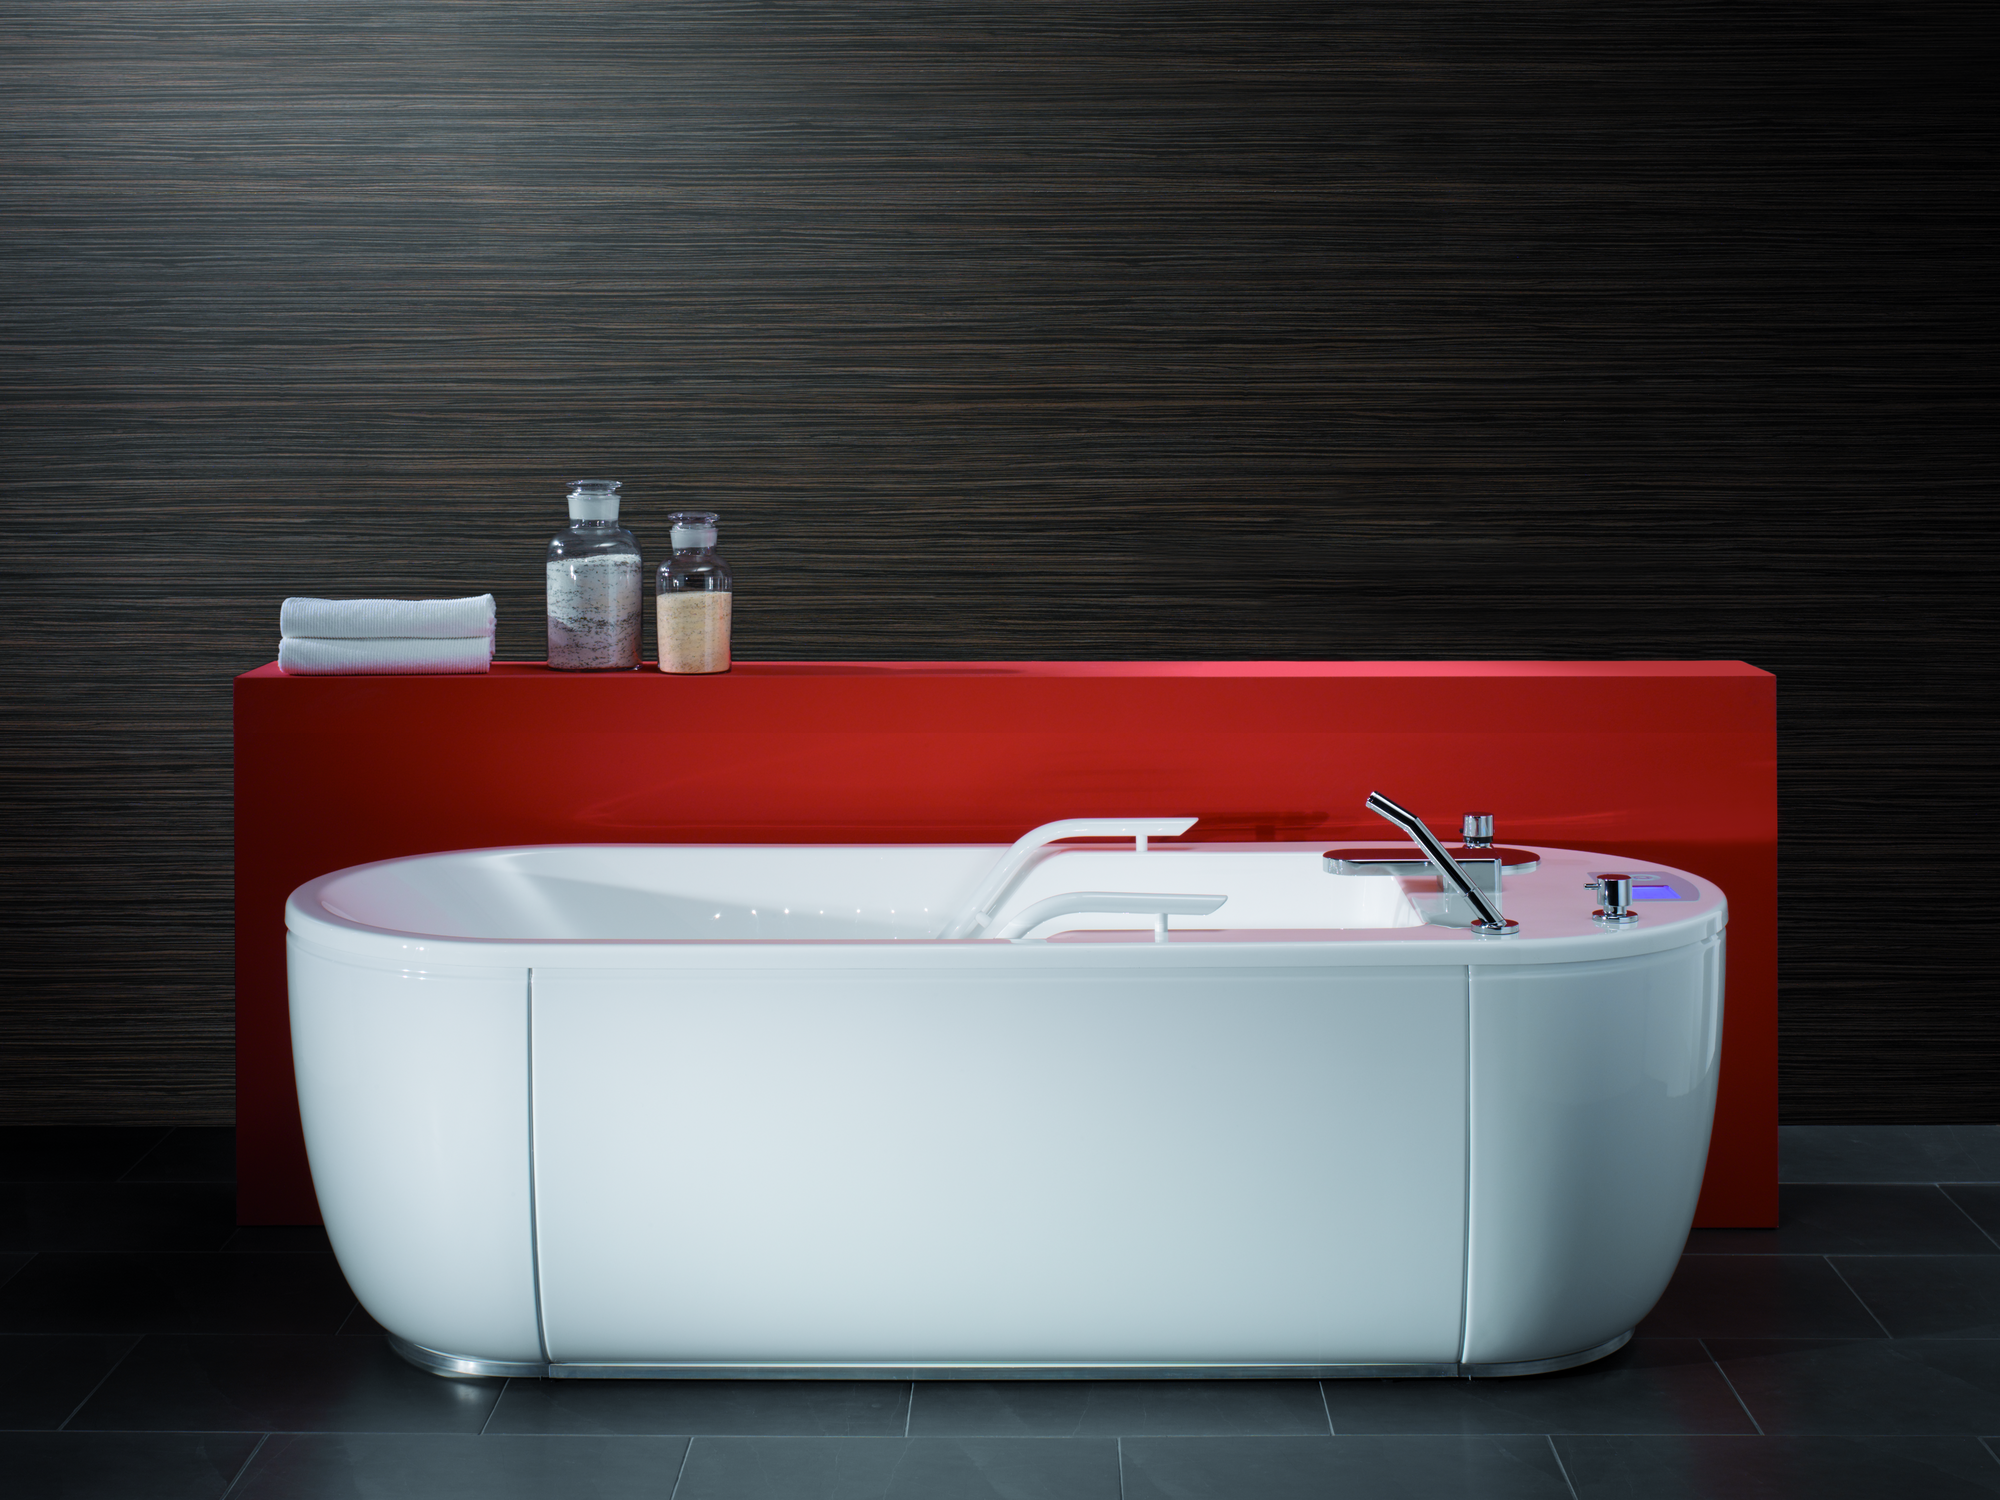 An elegant white bathtub for automatic underwater massage with 260 water jets